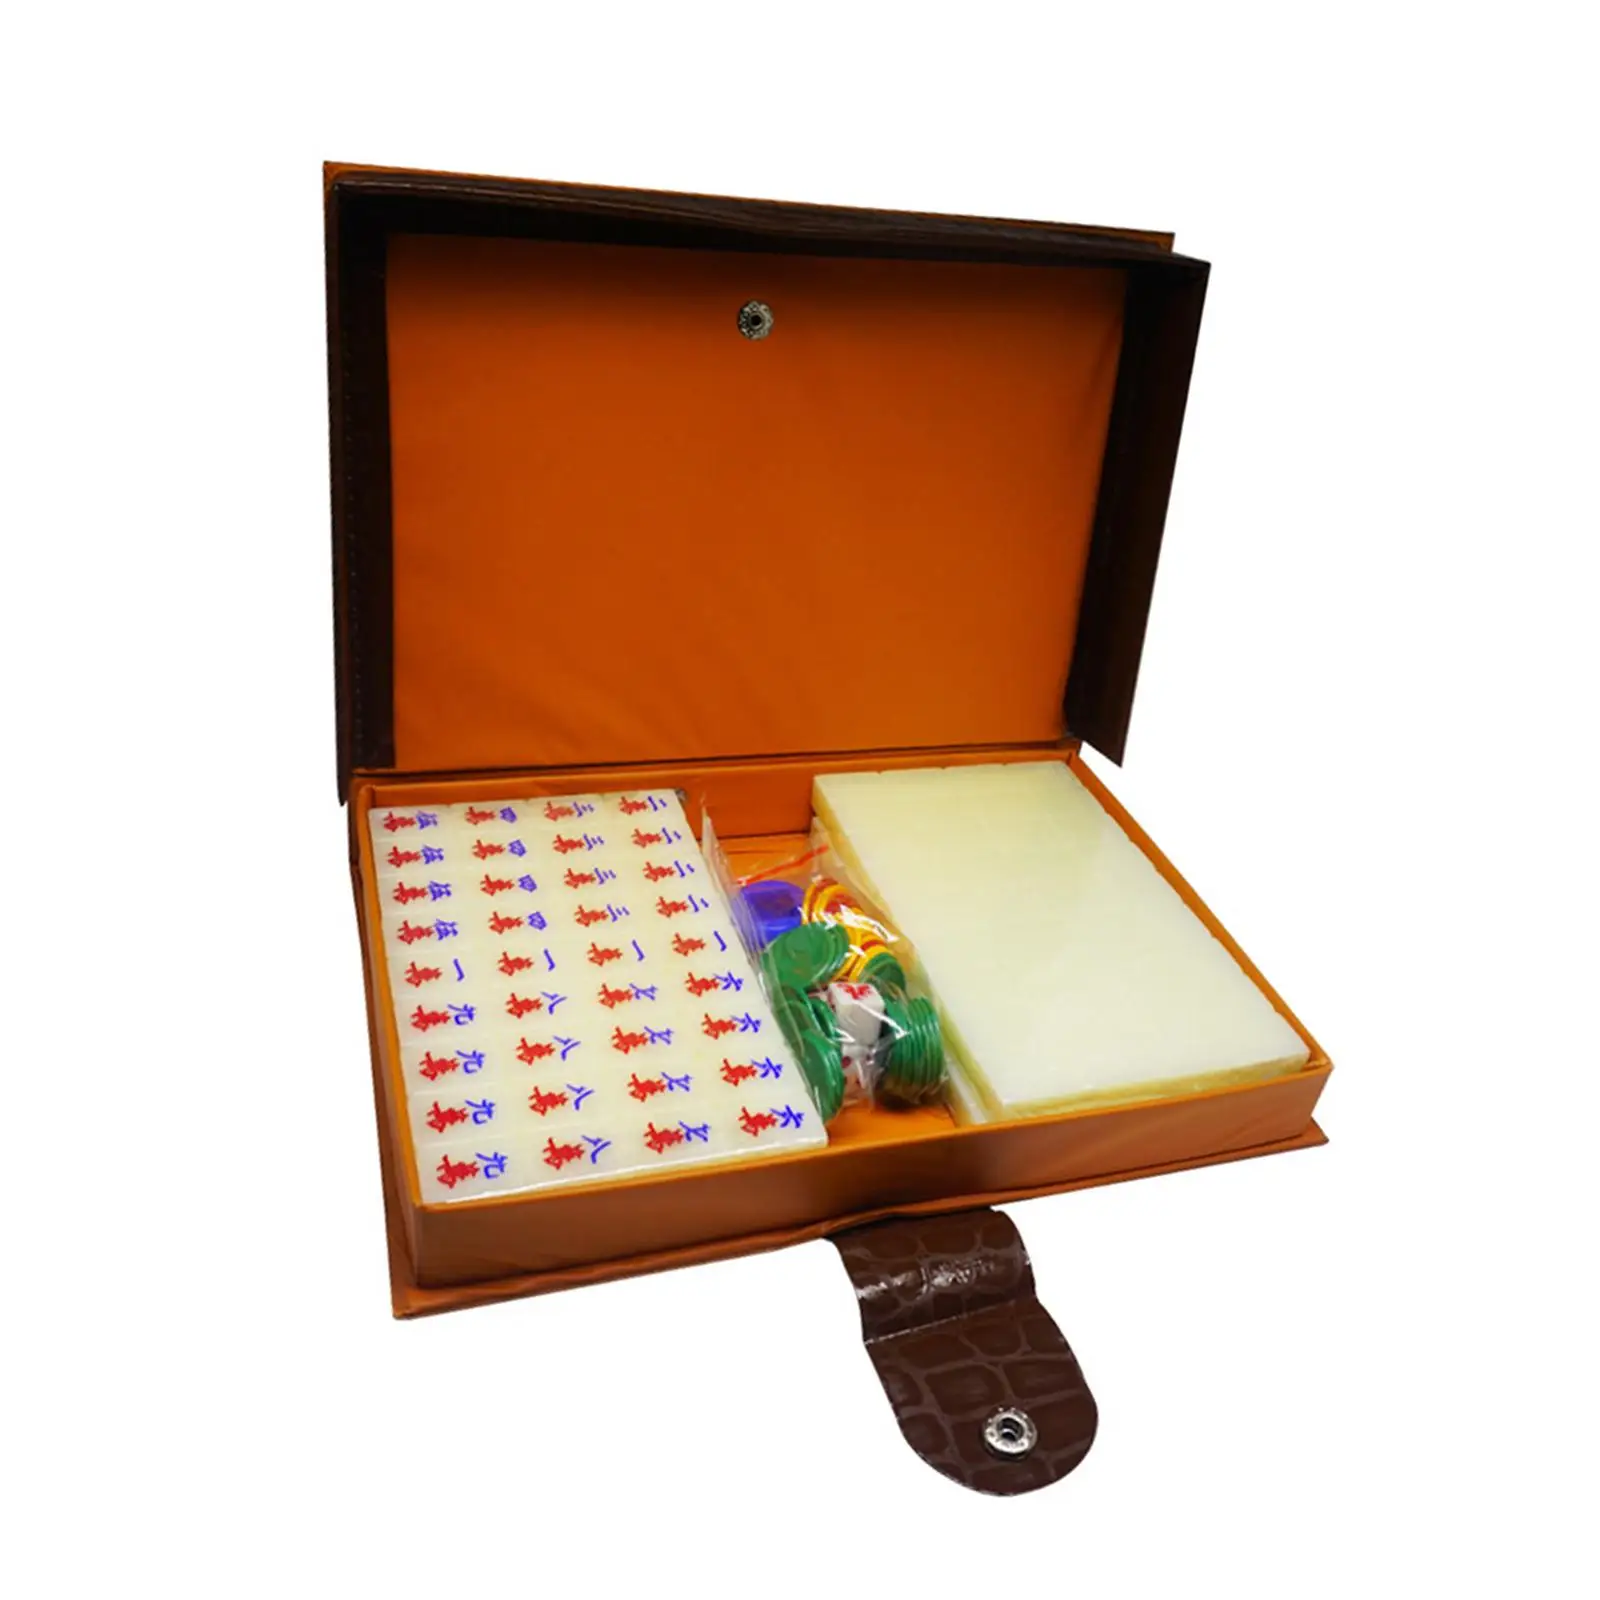 Mini Chinese Guangdong Mahjong Set with Carry Case Acrylic Easy to Read mAh Jongg for Game Nights Gatherings Leisure Party Home